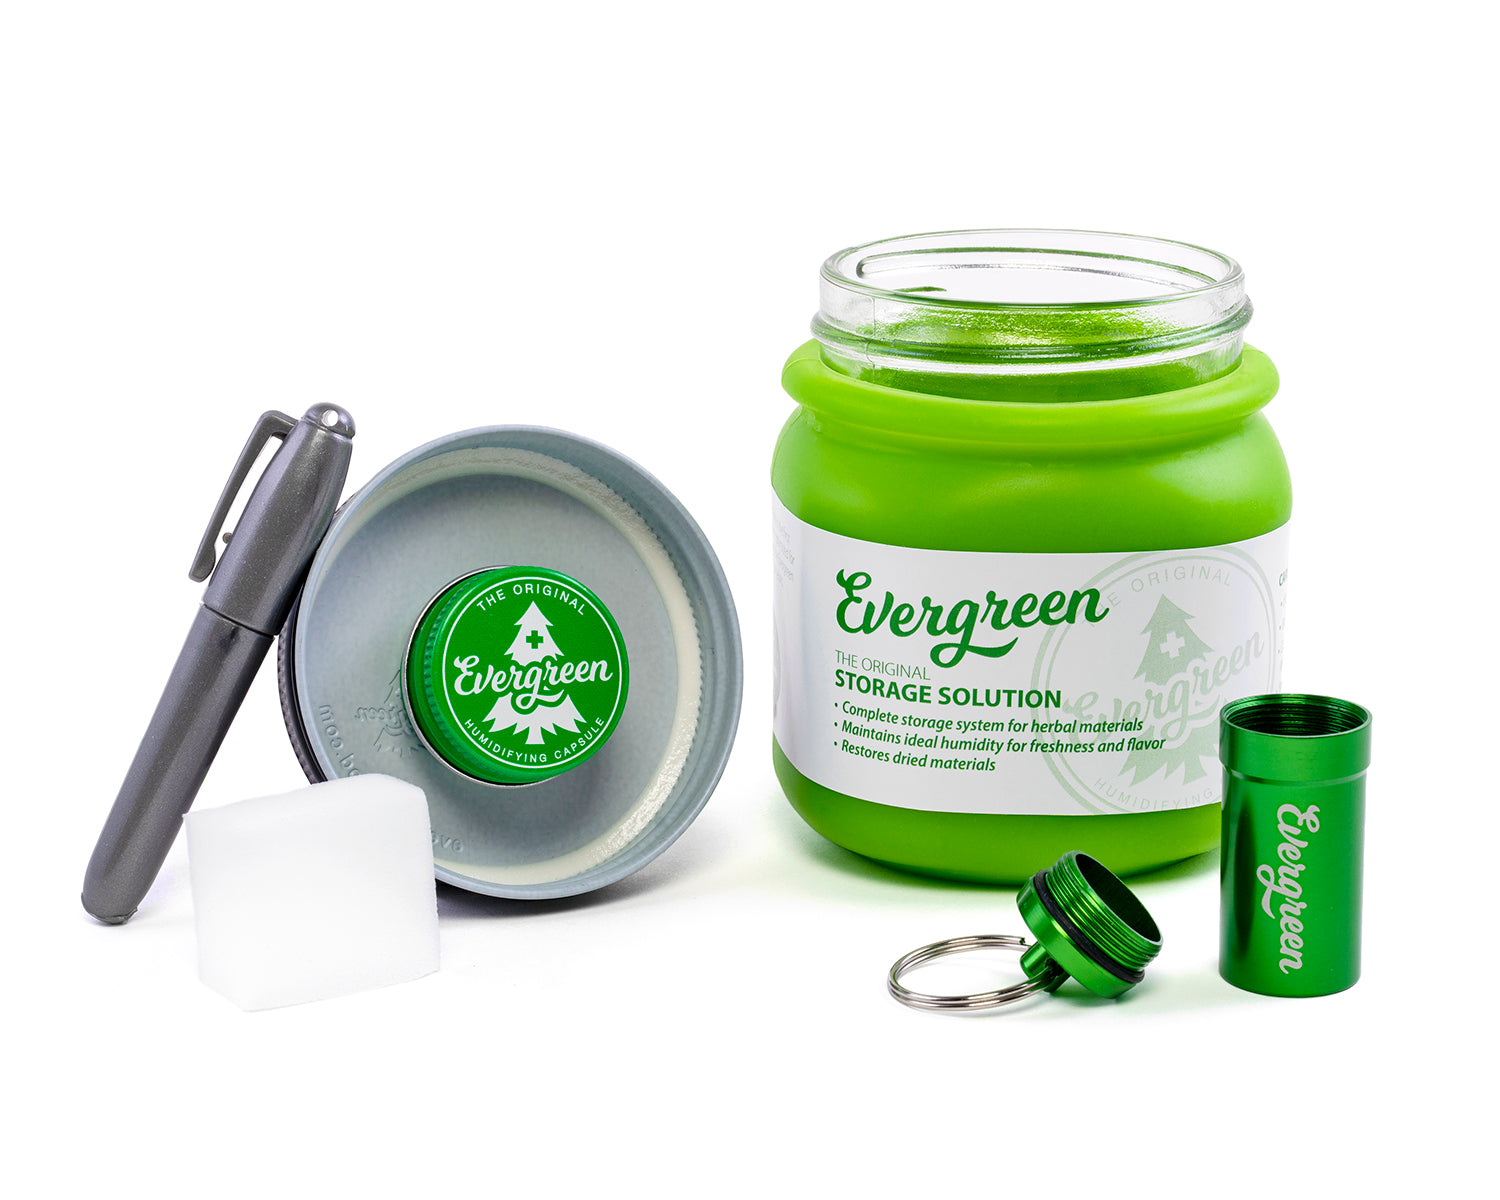 Evergreen Storage Solution open showing contents, light green